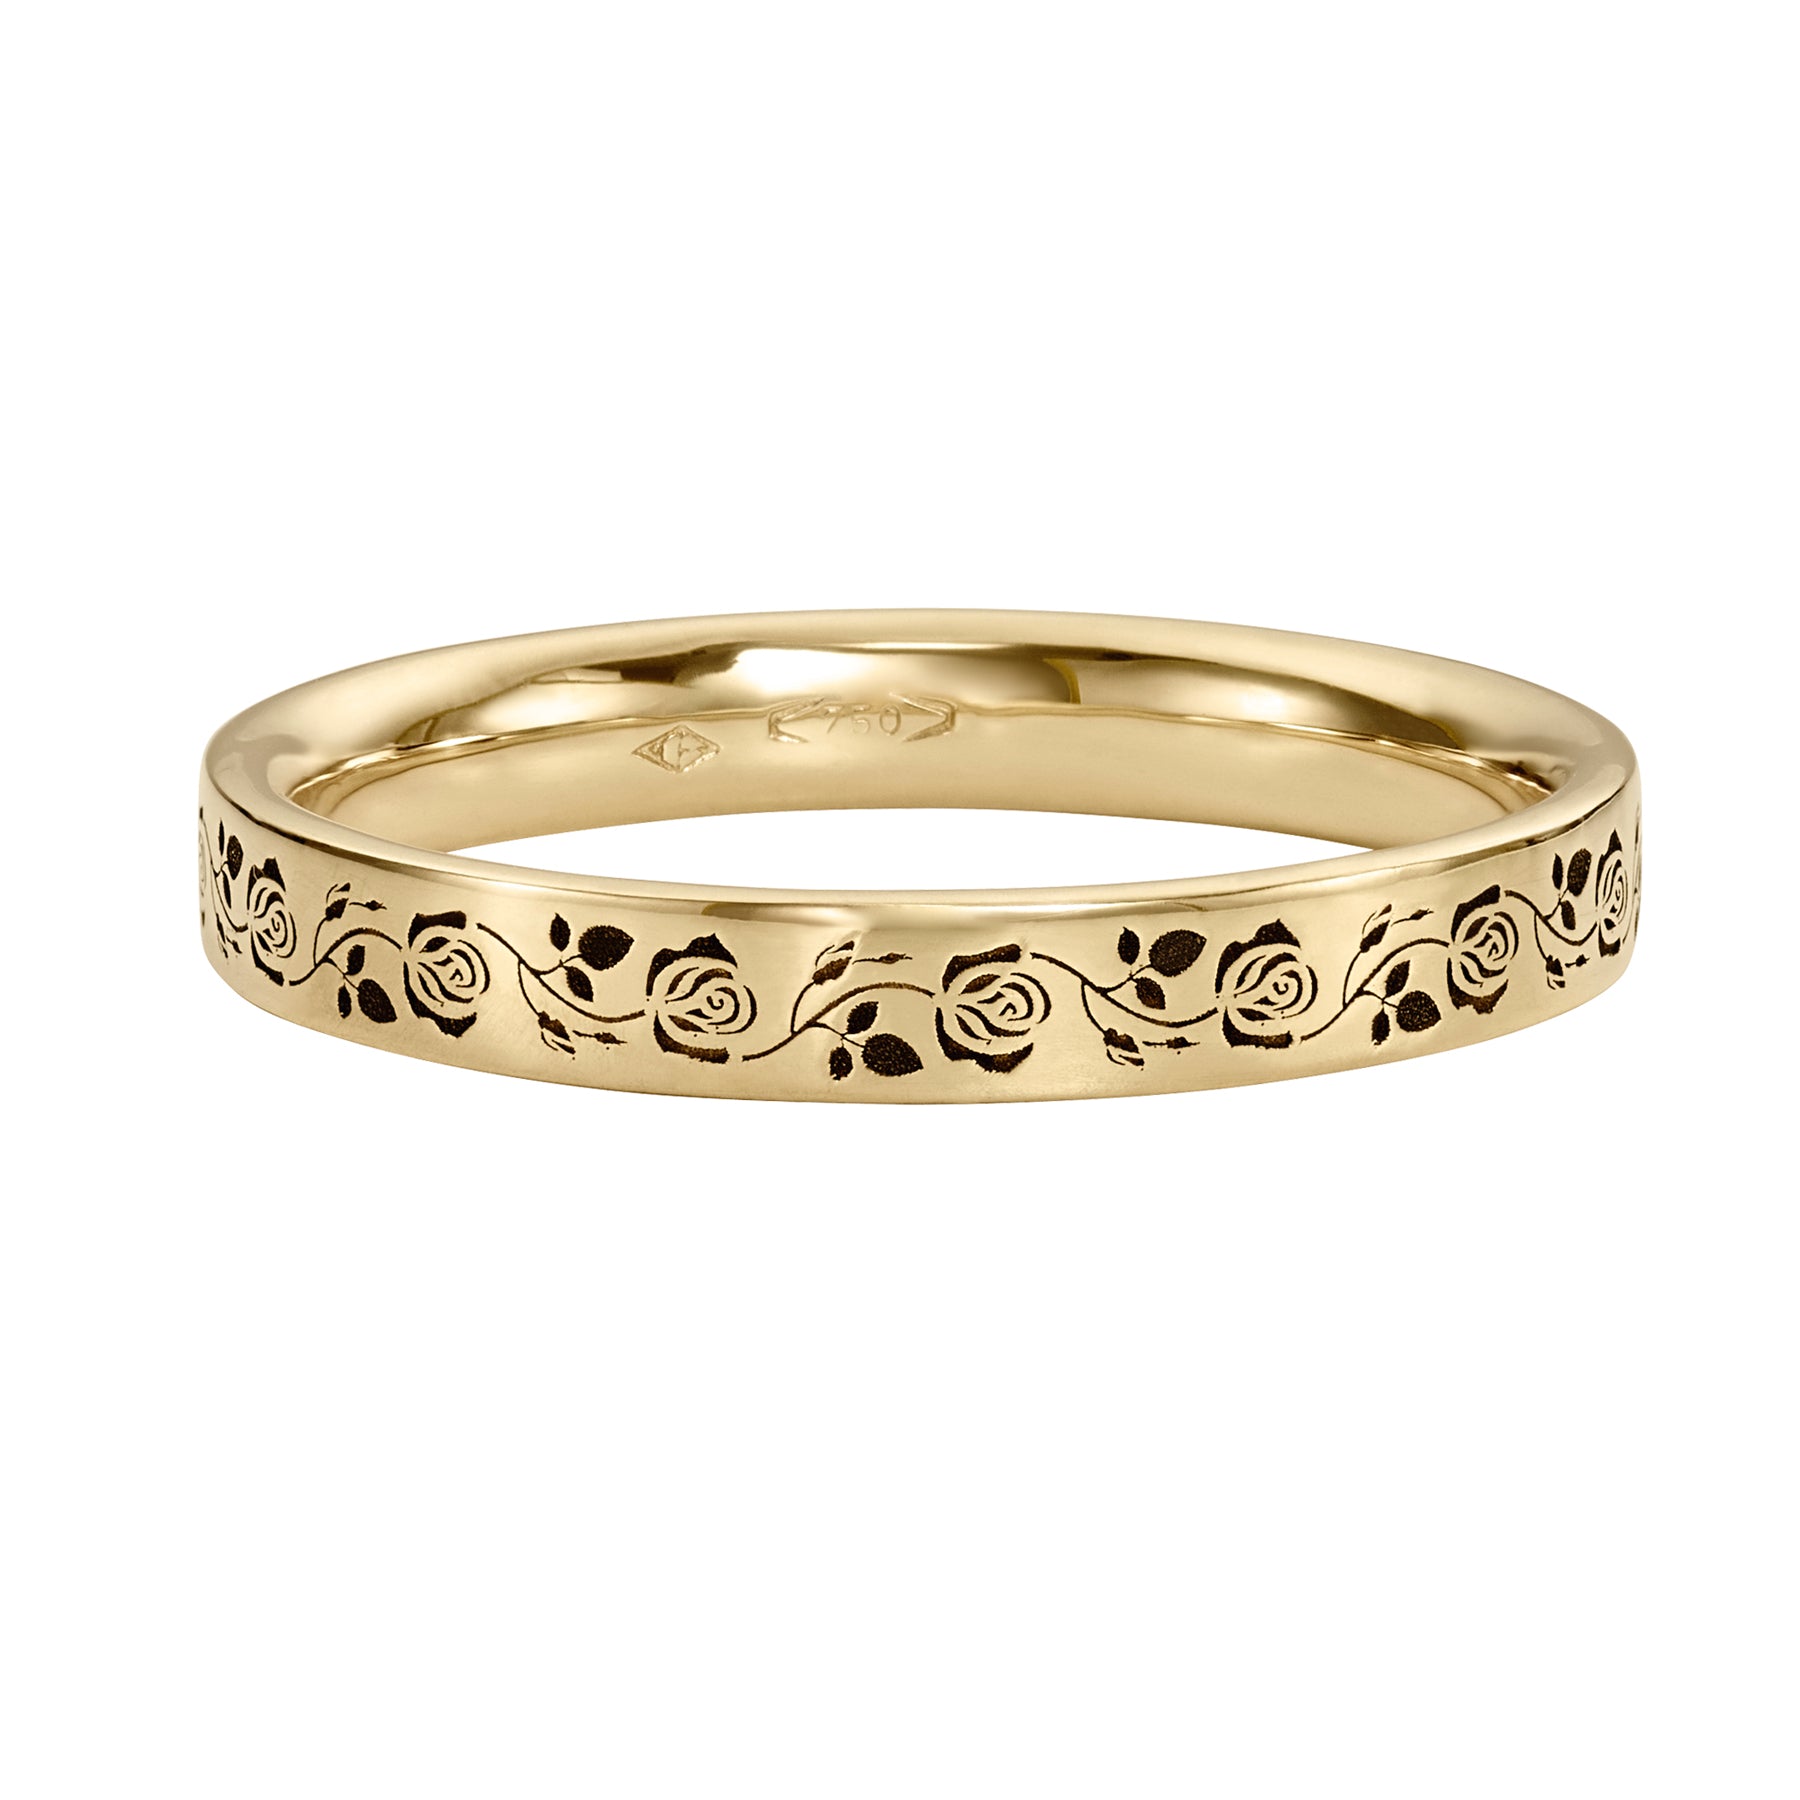 The Unique and Geometric - A Set of Golden Wedding Bands – ARTEMER